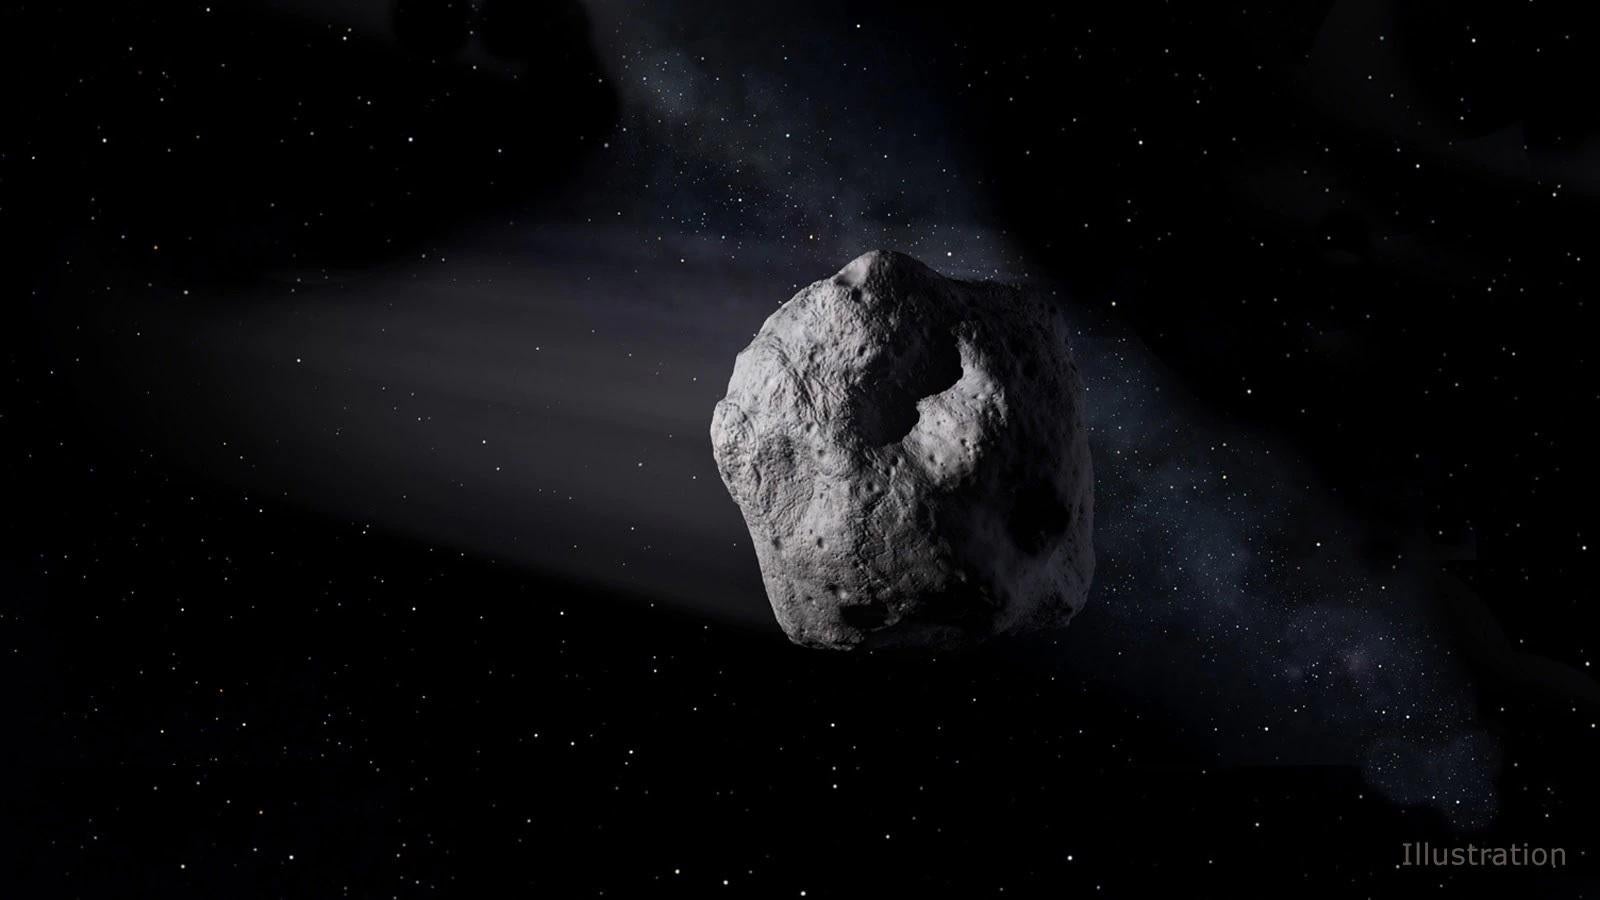 Artist's concept of a near-Earth object